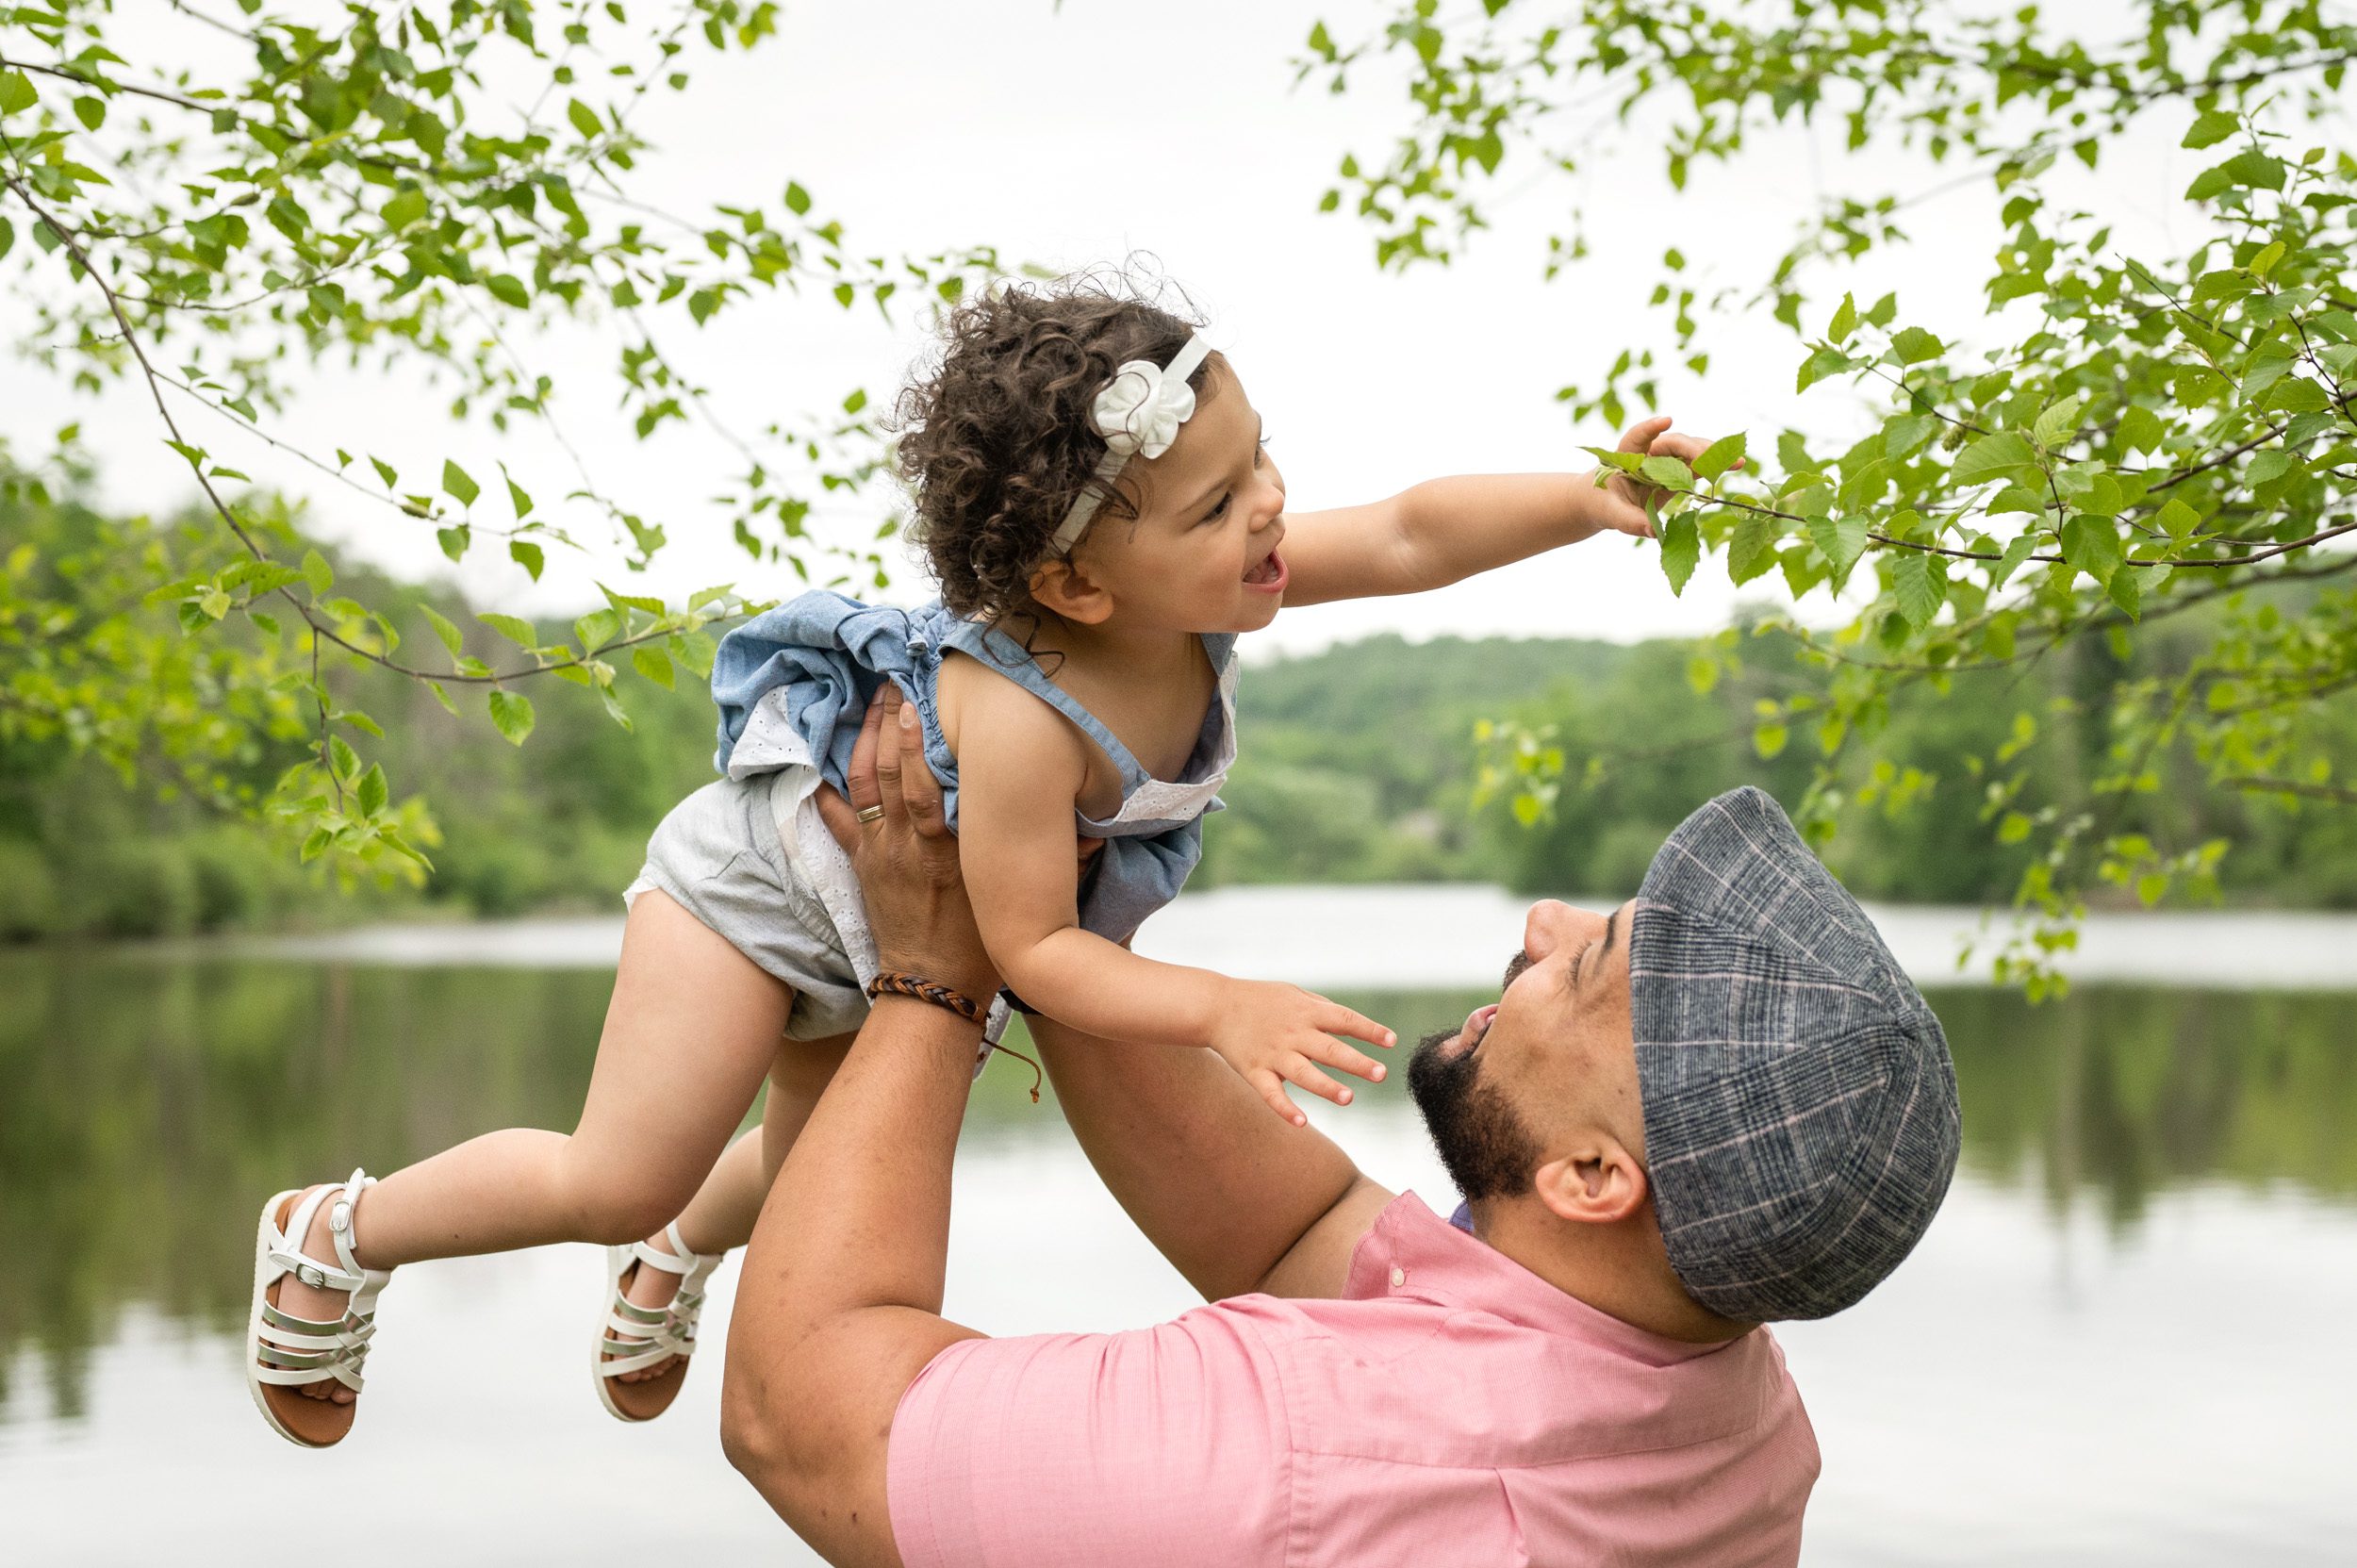 A little girl reaching for a leaf on a tree as her dad flies her through the air during a family photo session